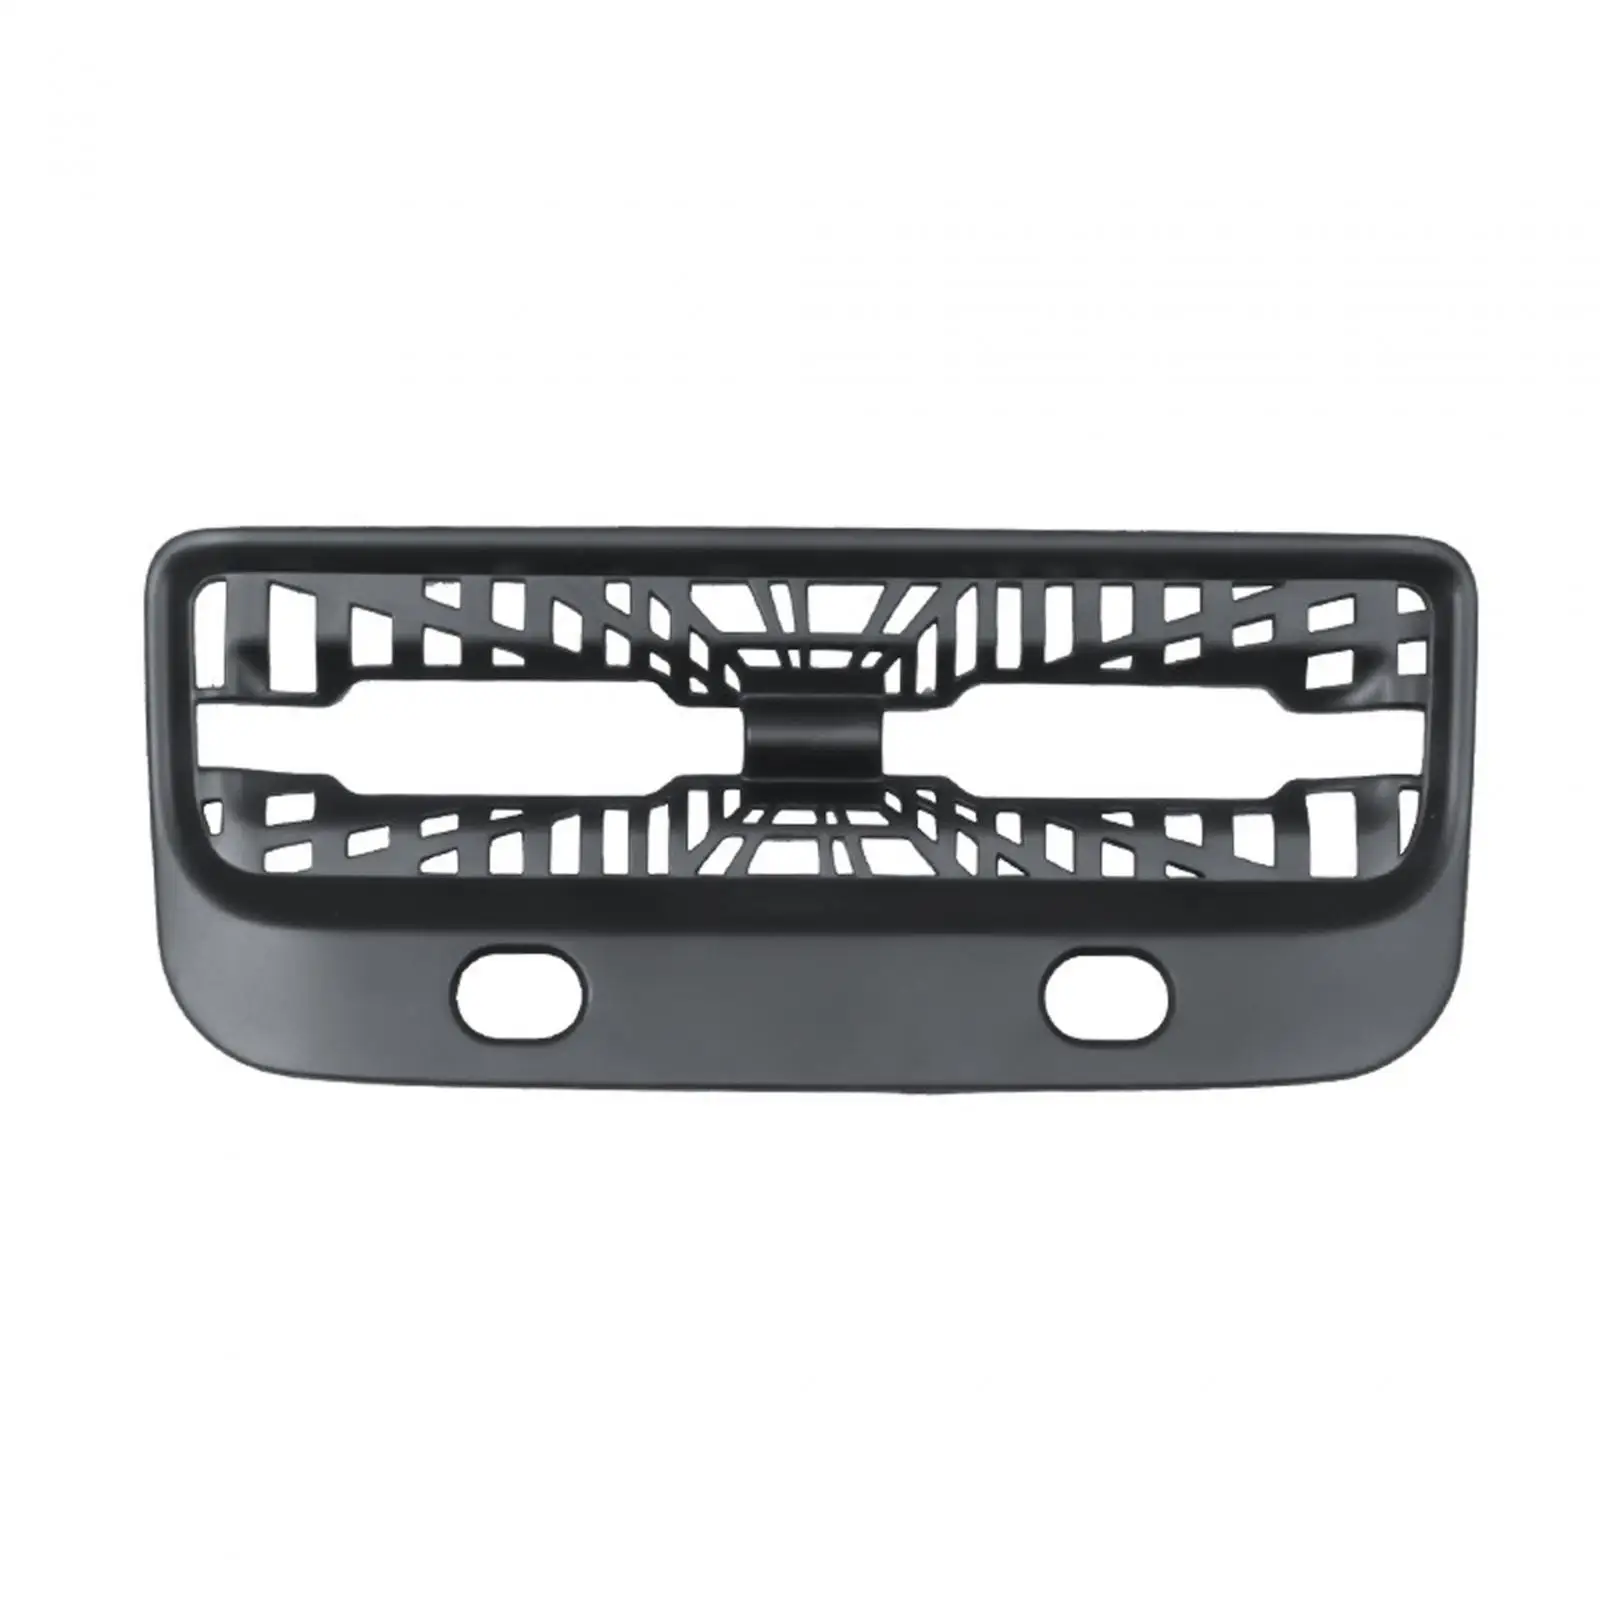 Rear AC Vents Cover Vent Protective Guard Replaces for Tesla Model Y 3